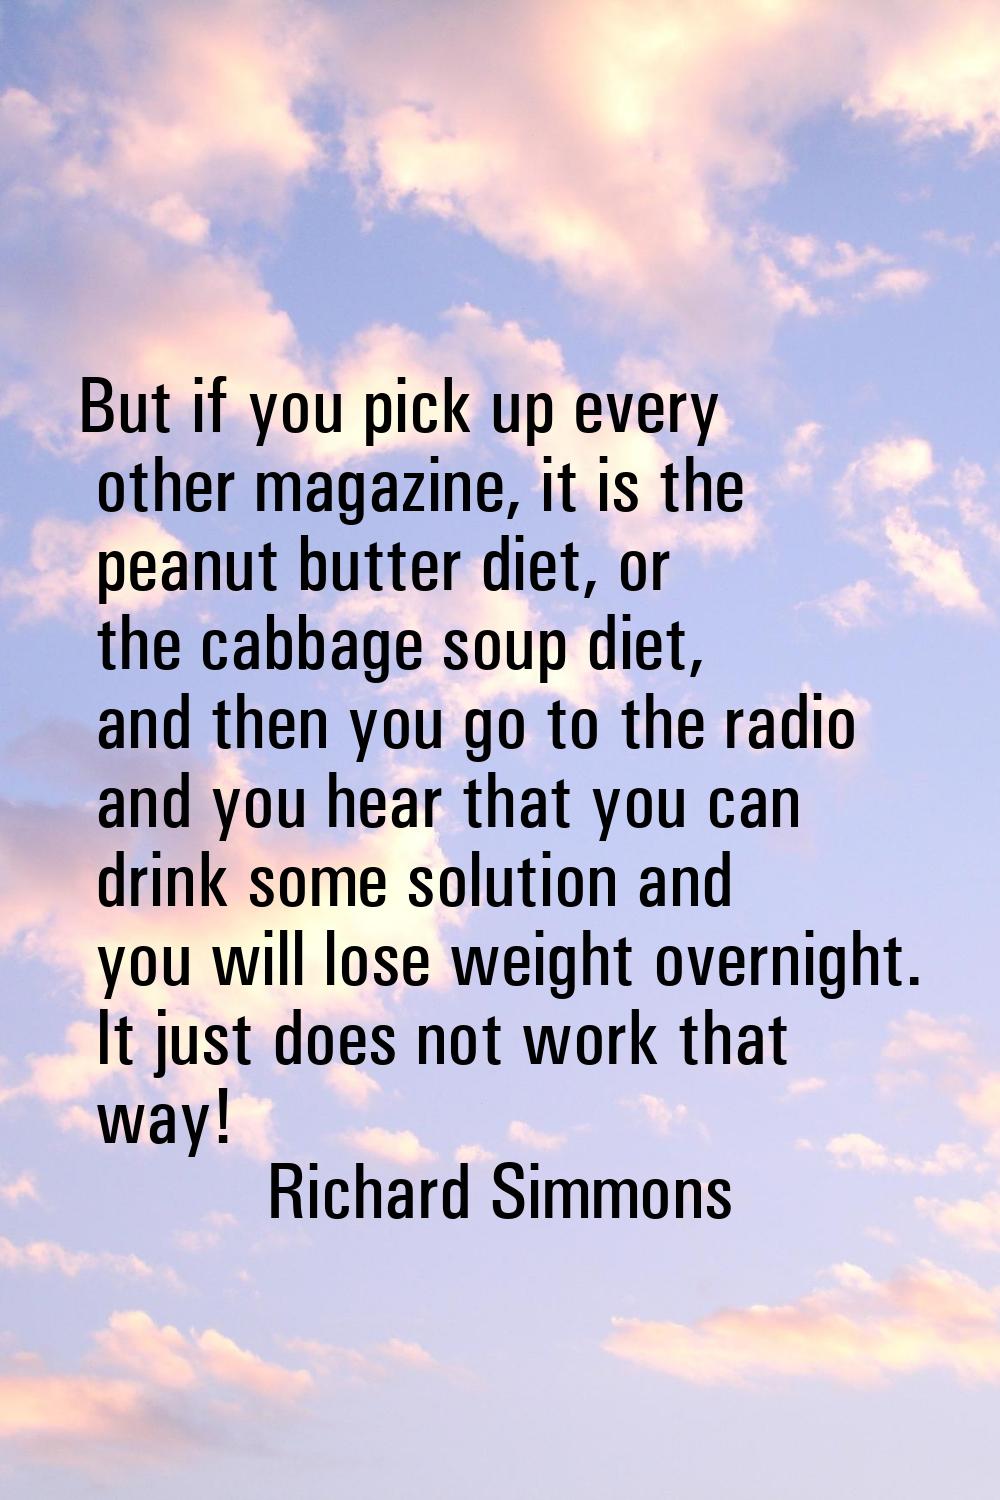 But if you pick up every other magazine, it is the peanut butter diet, or the cabbage soup diet, an